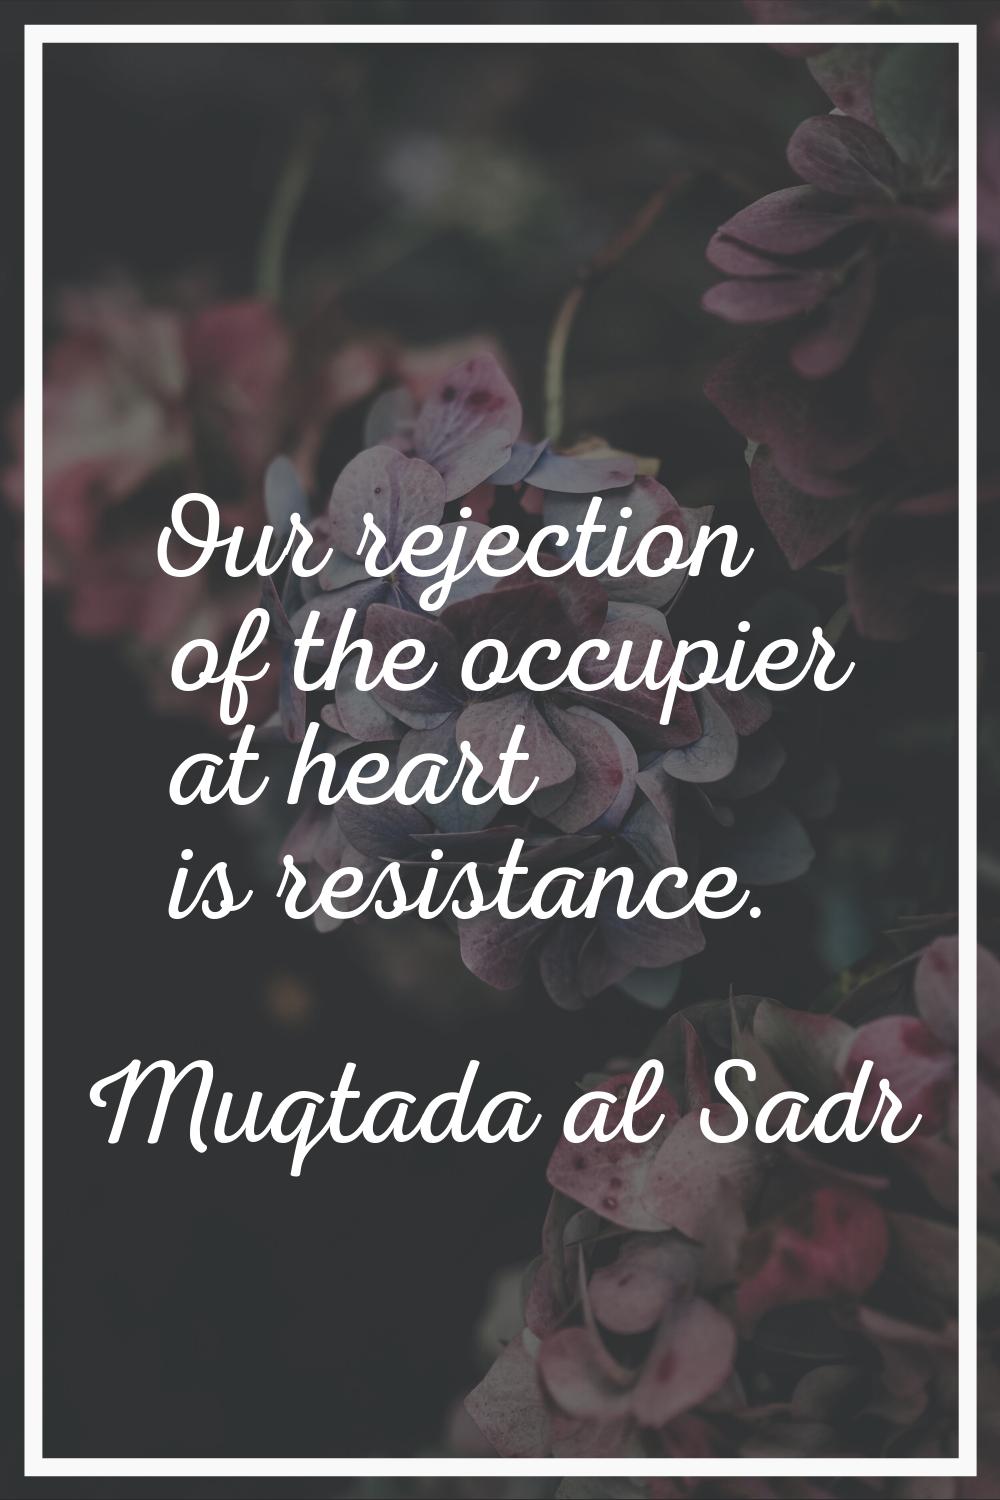 Our rejection of the occupier at heart is resistance.